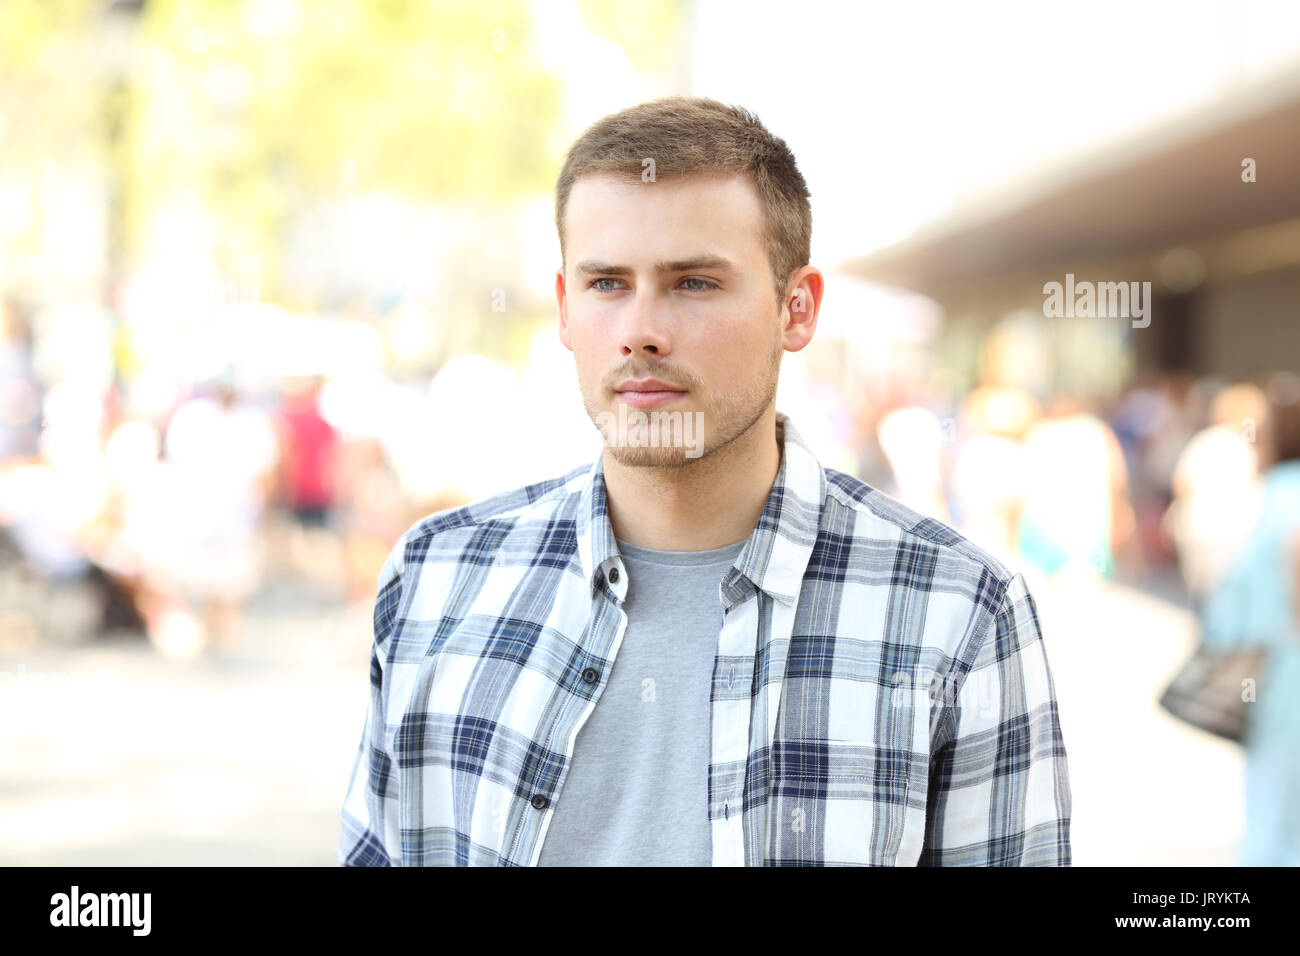 Portrait of a distracted man walking erratic on the street Stock Photo